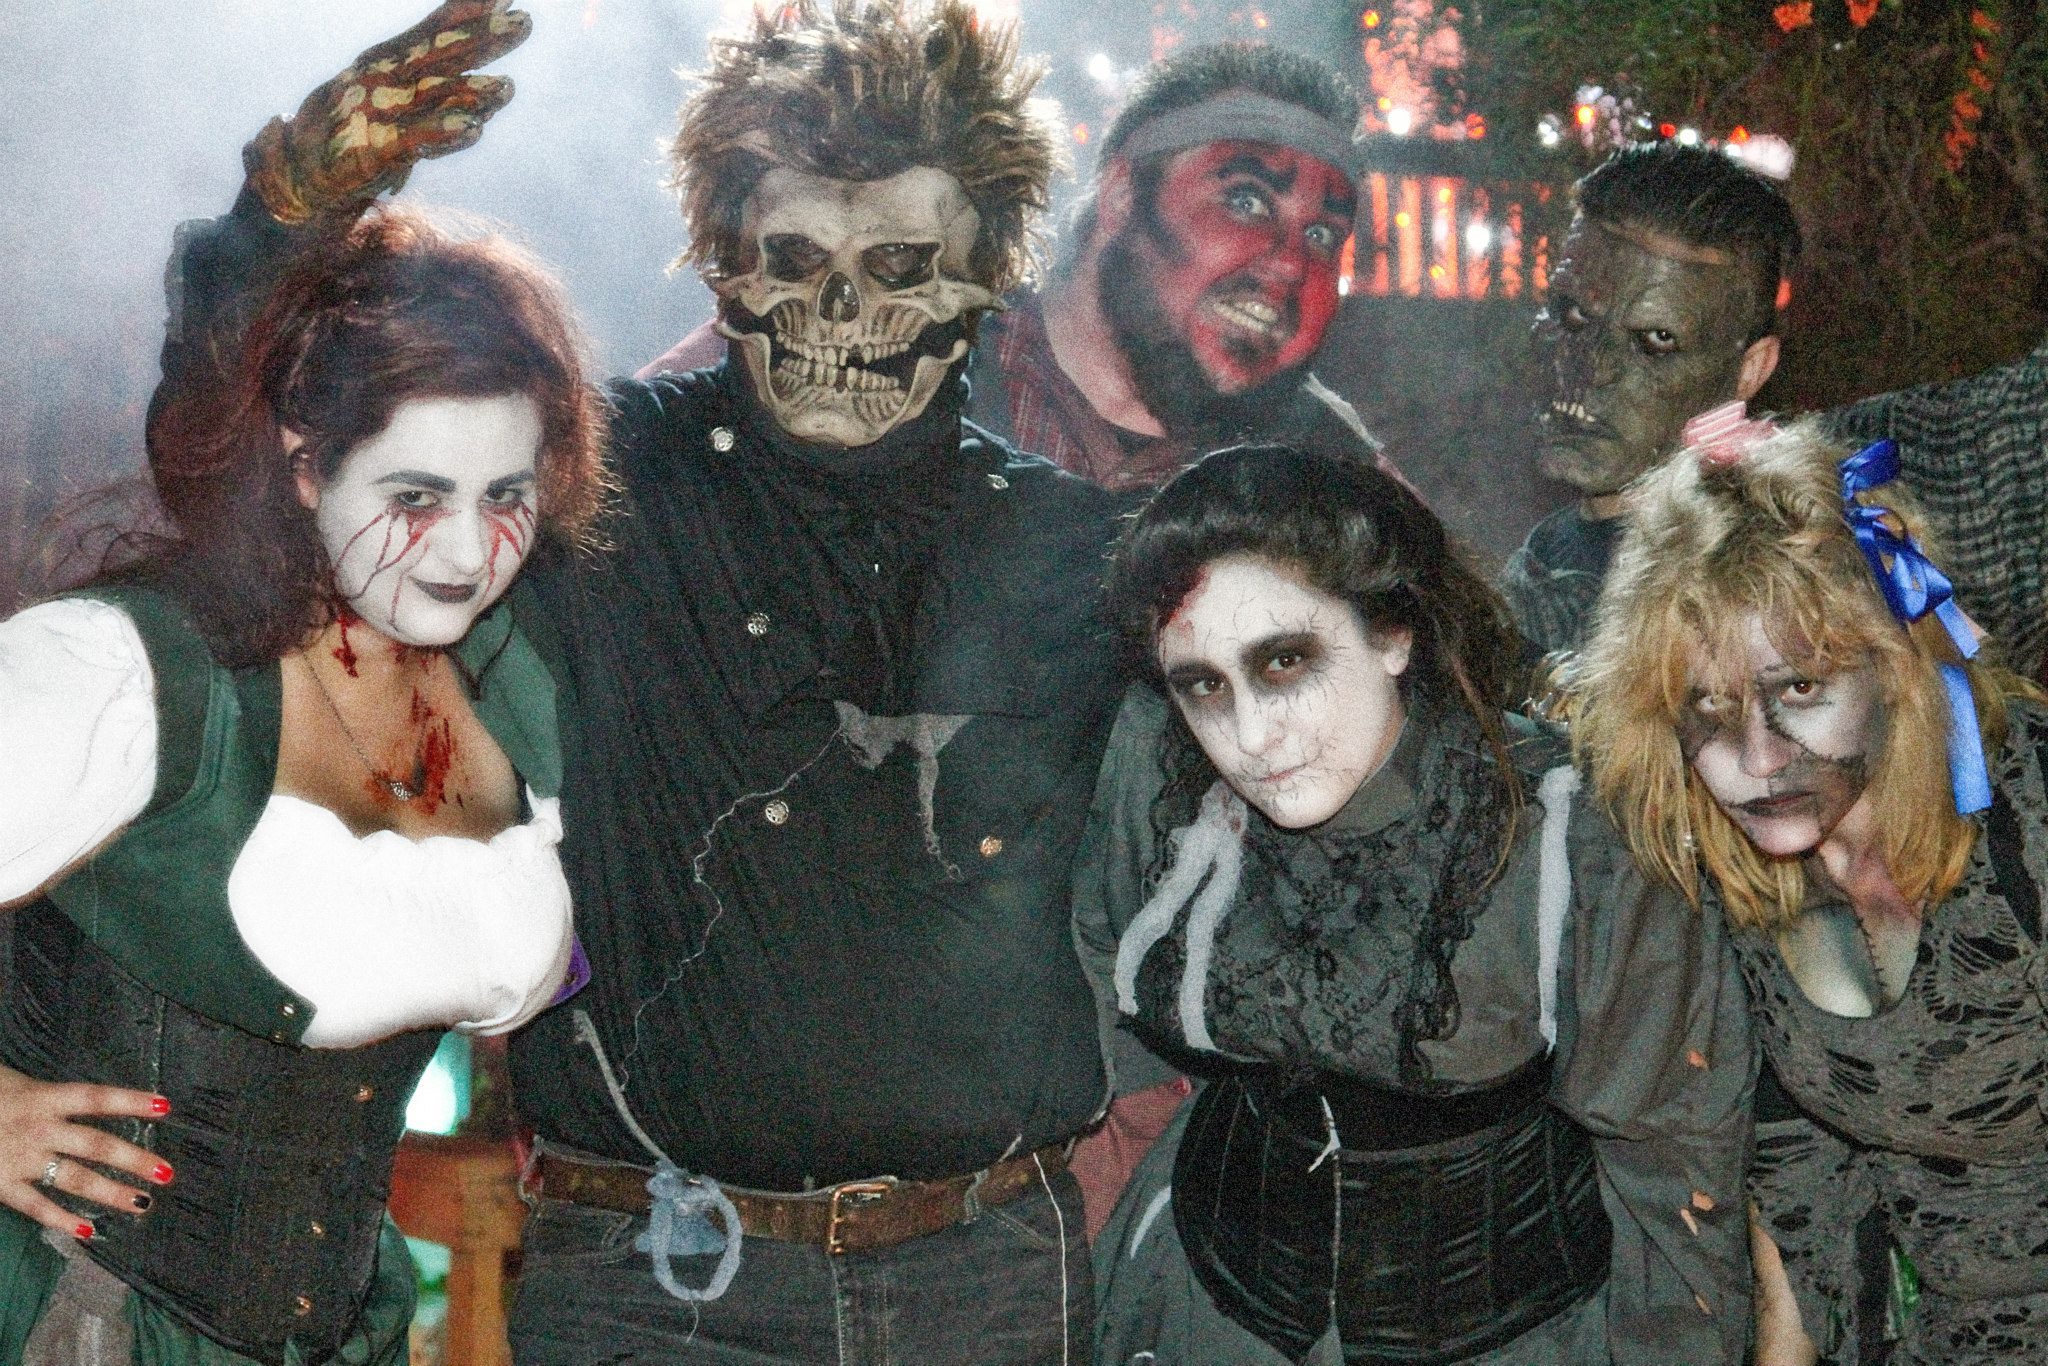 Haunt at Heritage Hill returns for Halloween fun Friday and Saturday, Oct. 17 and 18, 25151 Serrano Road, Lake Forest. Those who dare can tour the haunted house and scare mazes. Enjoy live music, stage performances and a classic horror movie screening. 6 – 10:30 p.m., $7 per person. 